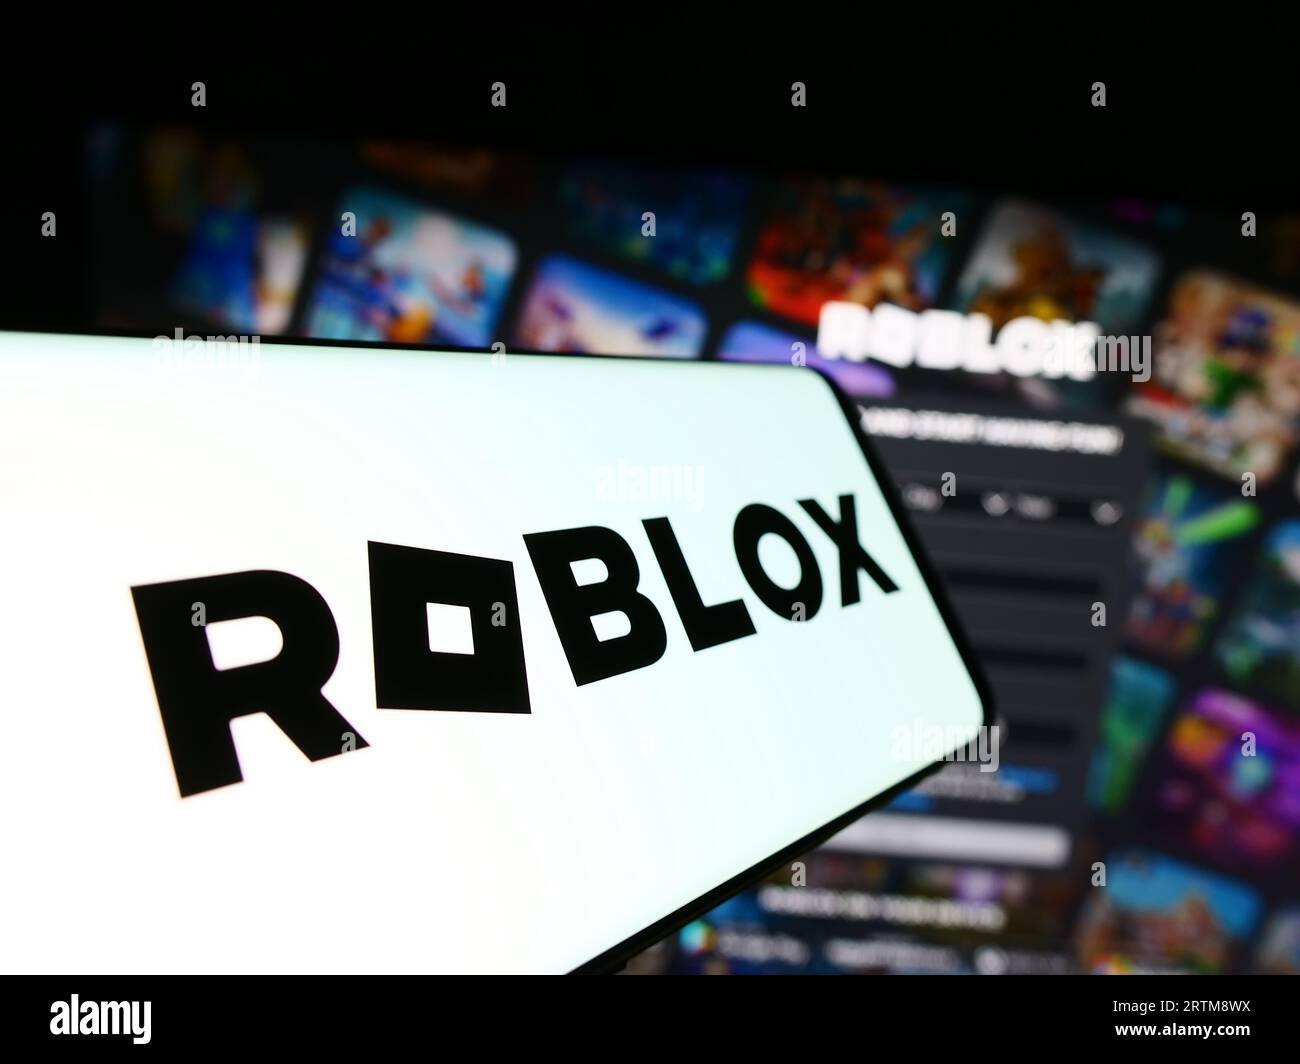 Roblox Sign Logo at Headquarters. Roblox is an Online Gaming